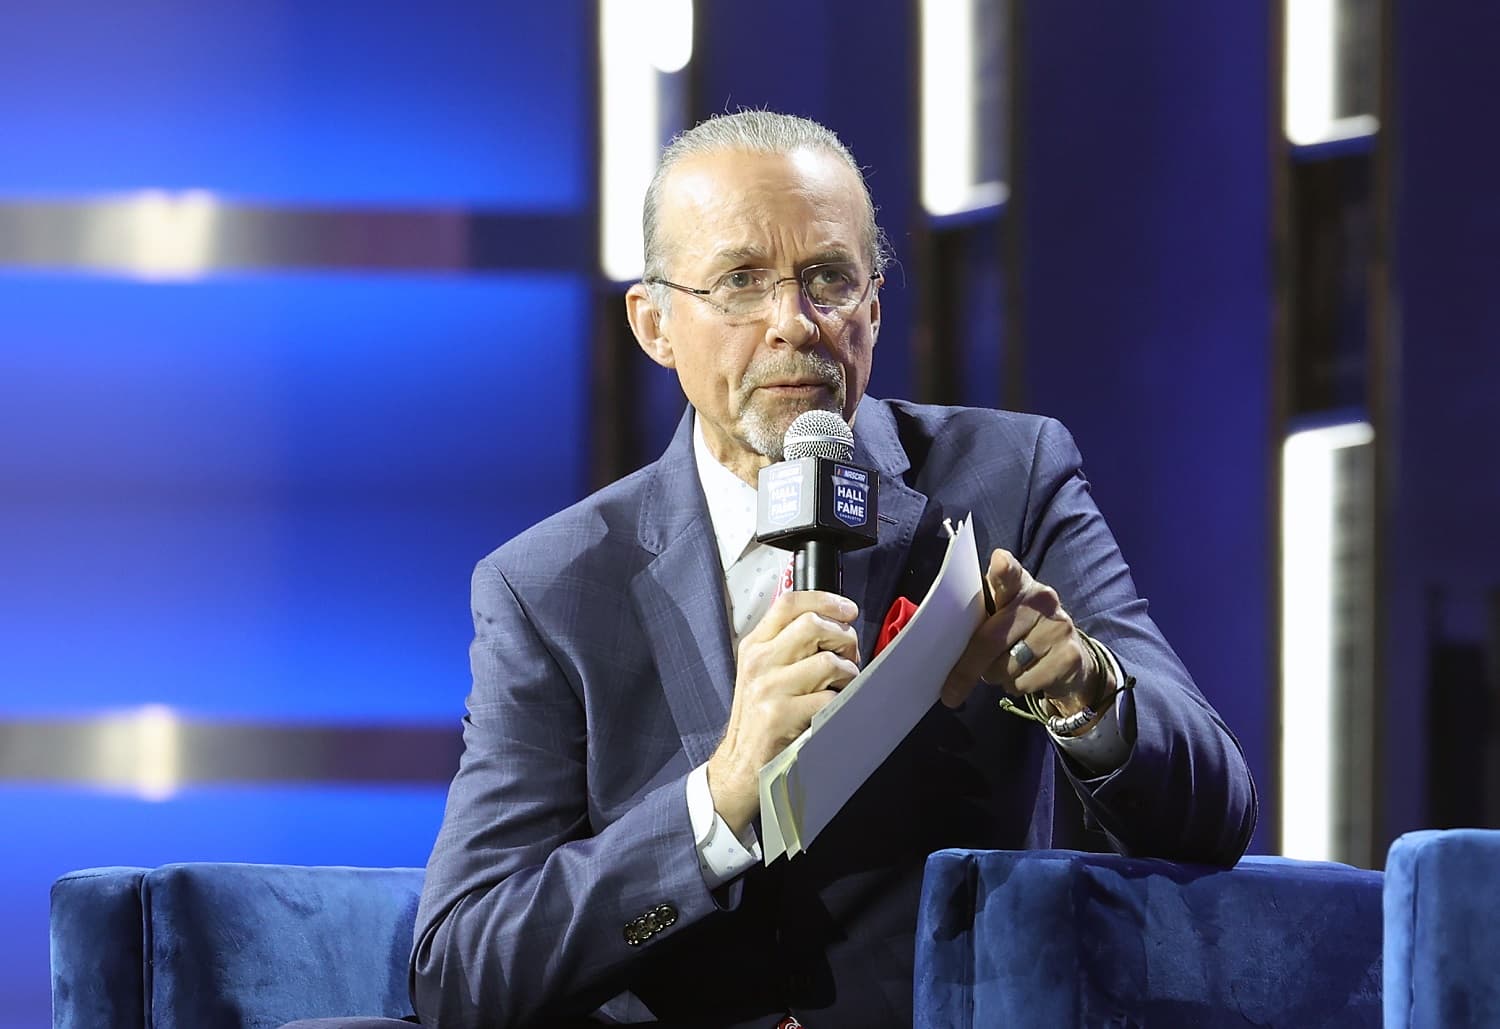 Kyle Petty speaks during the "Fireside Chat" prior to the NASCAR Hall of Fame Induction Ceremony at Charlotte Convention Center on Jan. 20, 2023 in Charlotte, North Carolina. | David Jensen/Getty Images